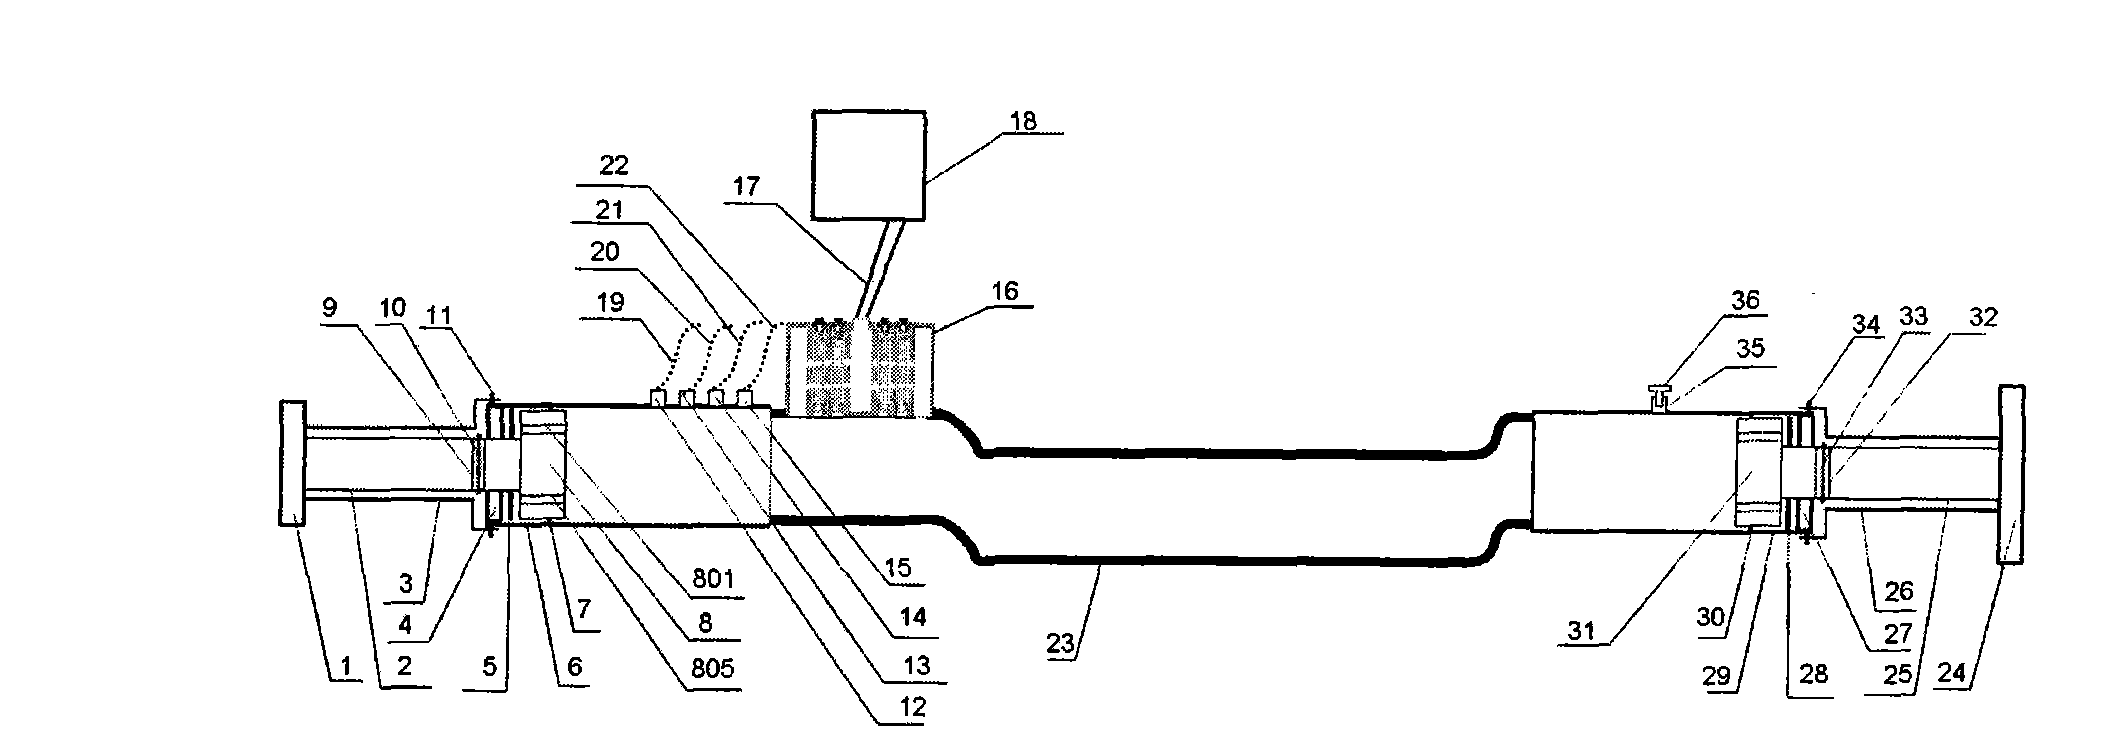 Motor vehicle collision device with jet energy consumer